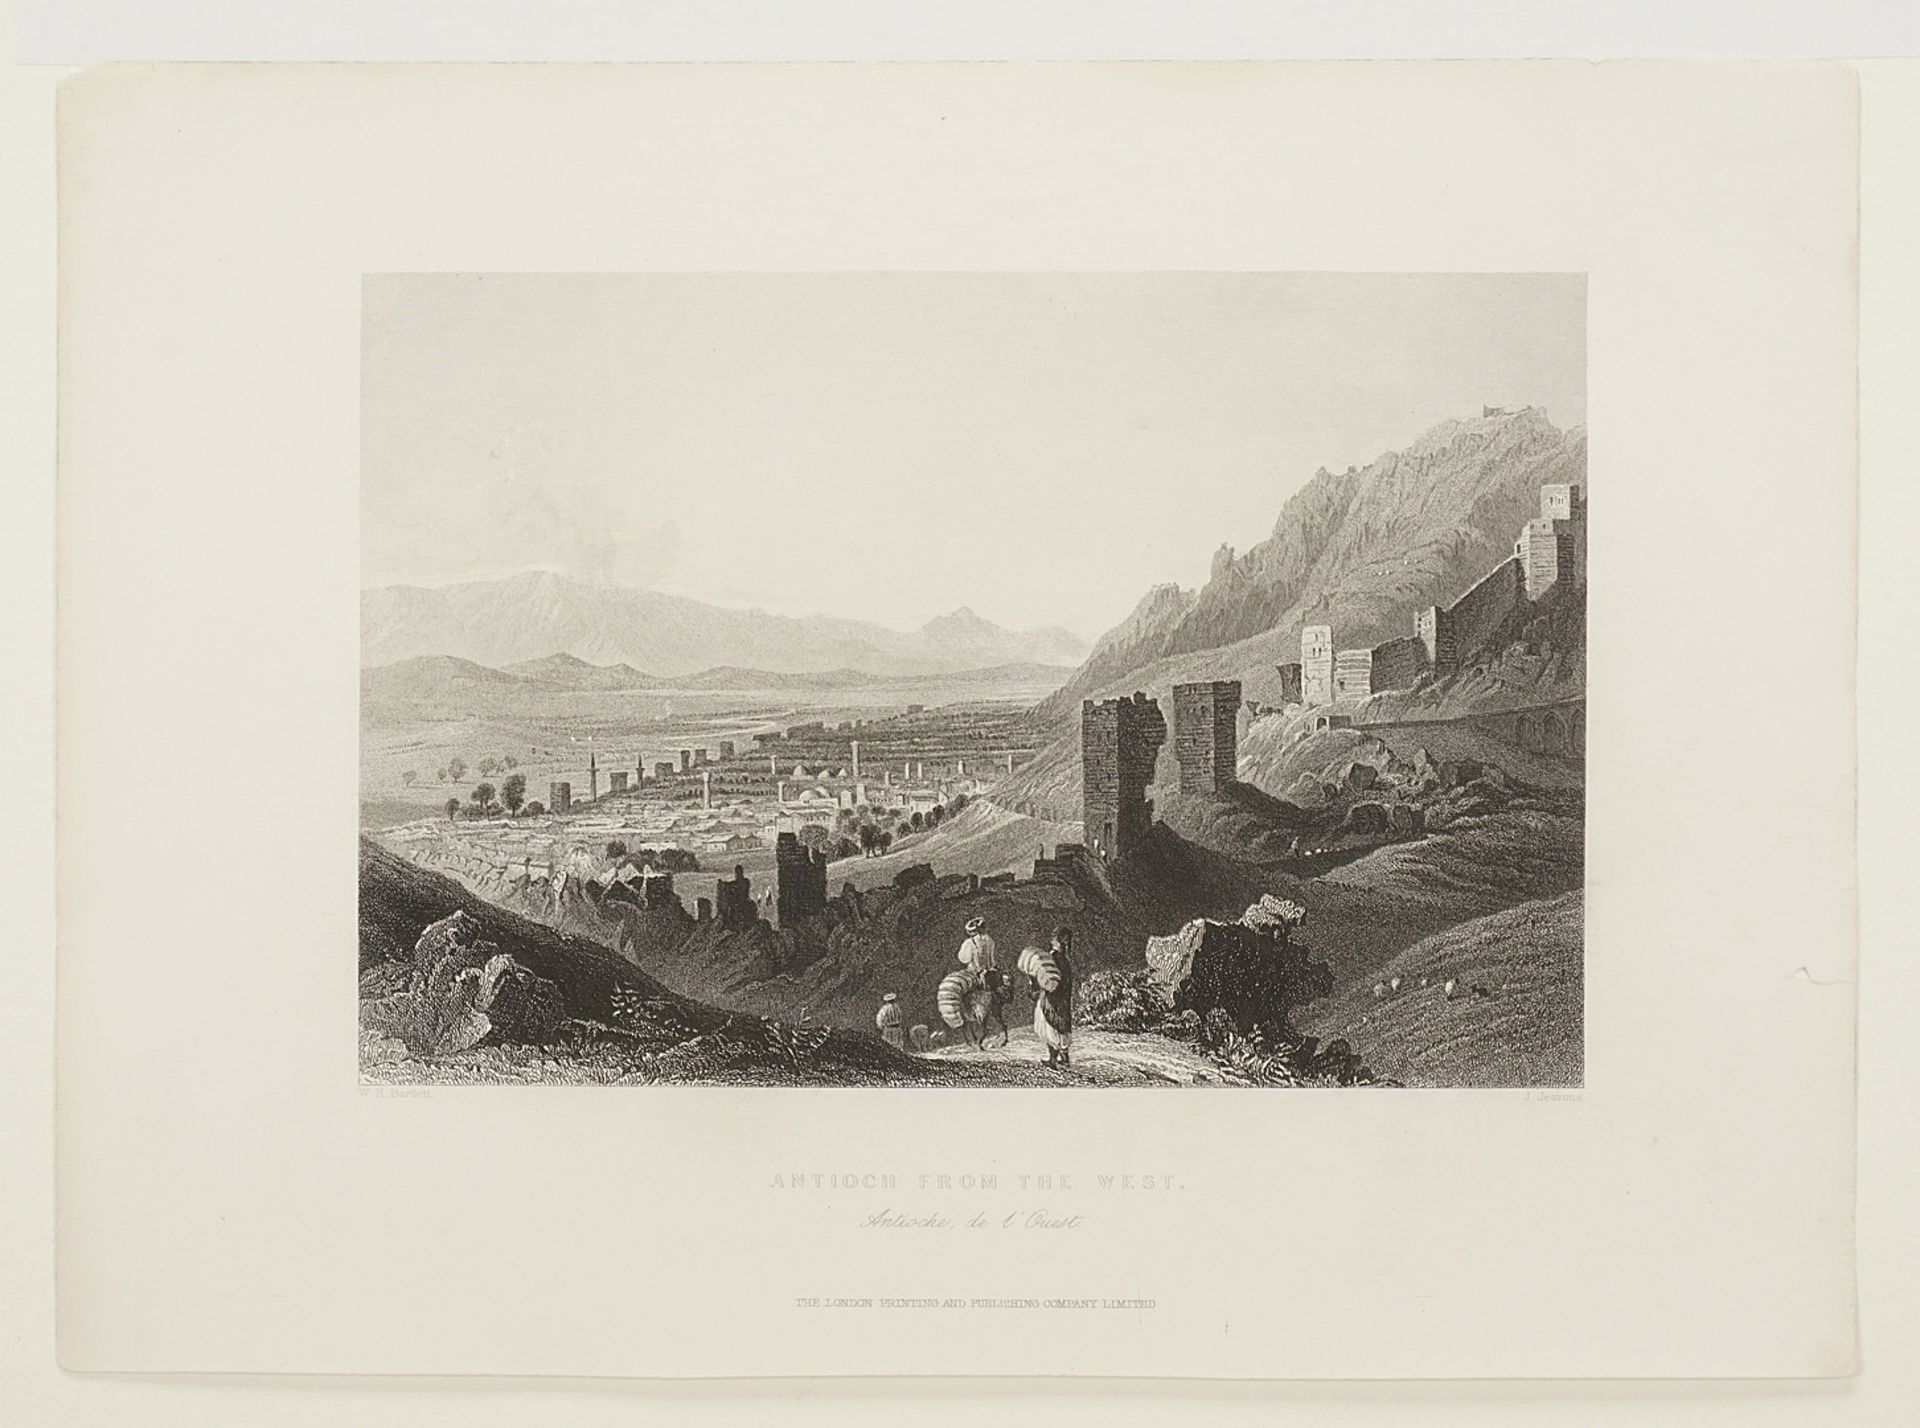 J. Jeavons, "Antioch from the West" - Image 3 of 3